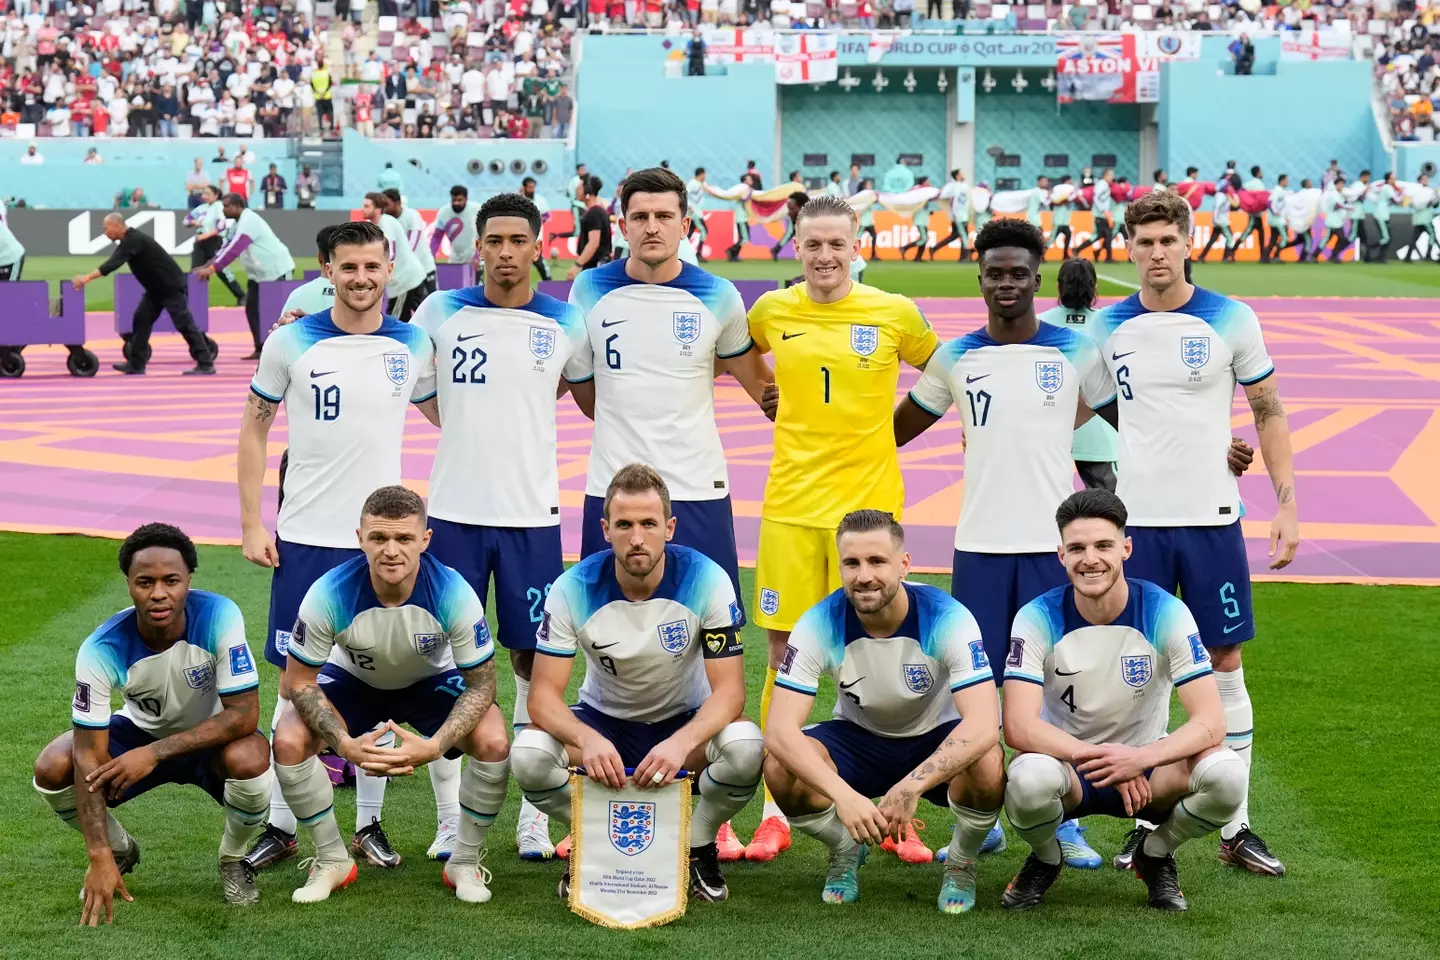 England players line-up prior to the game. (Image